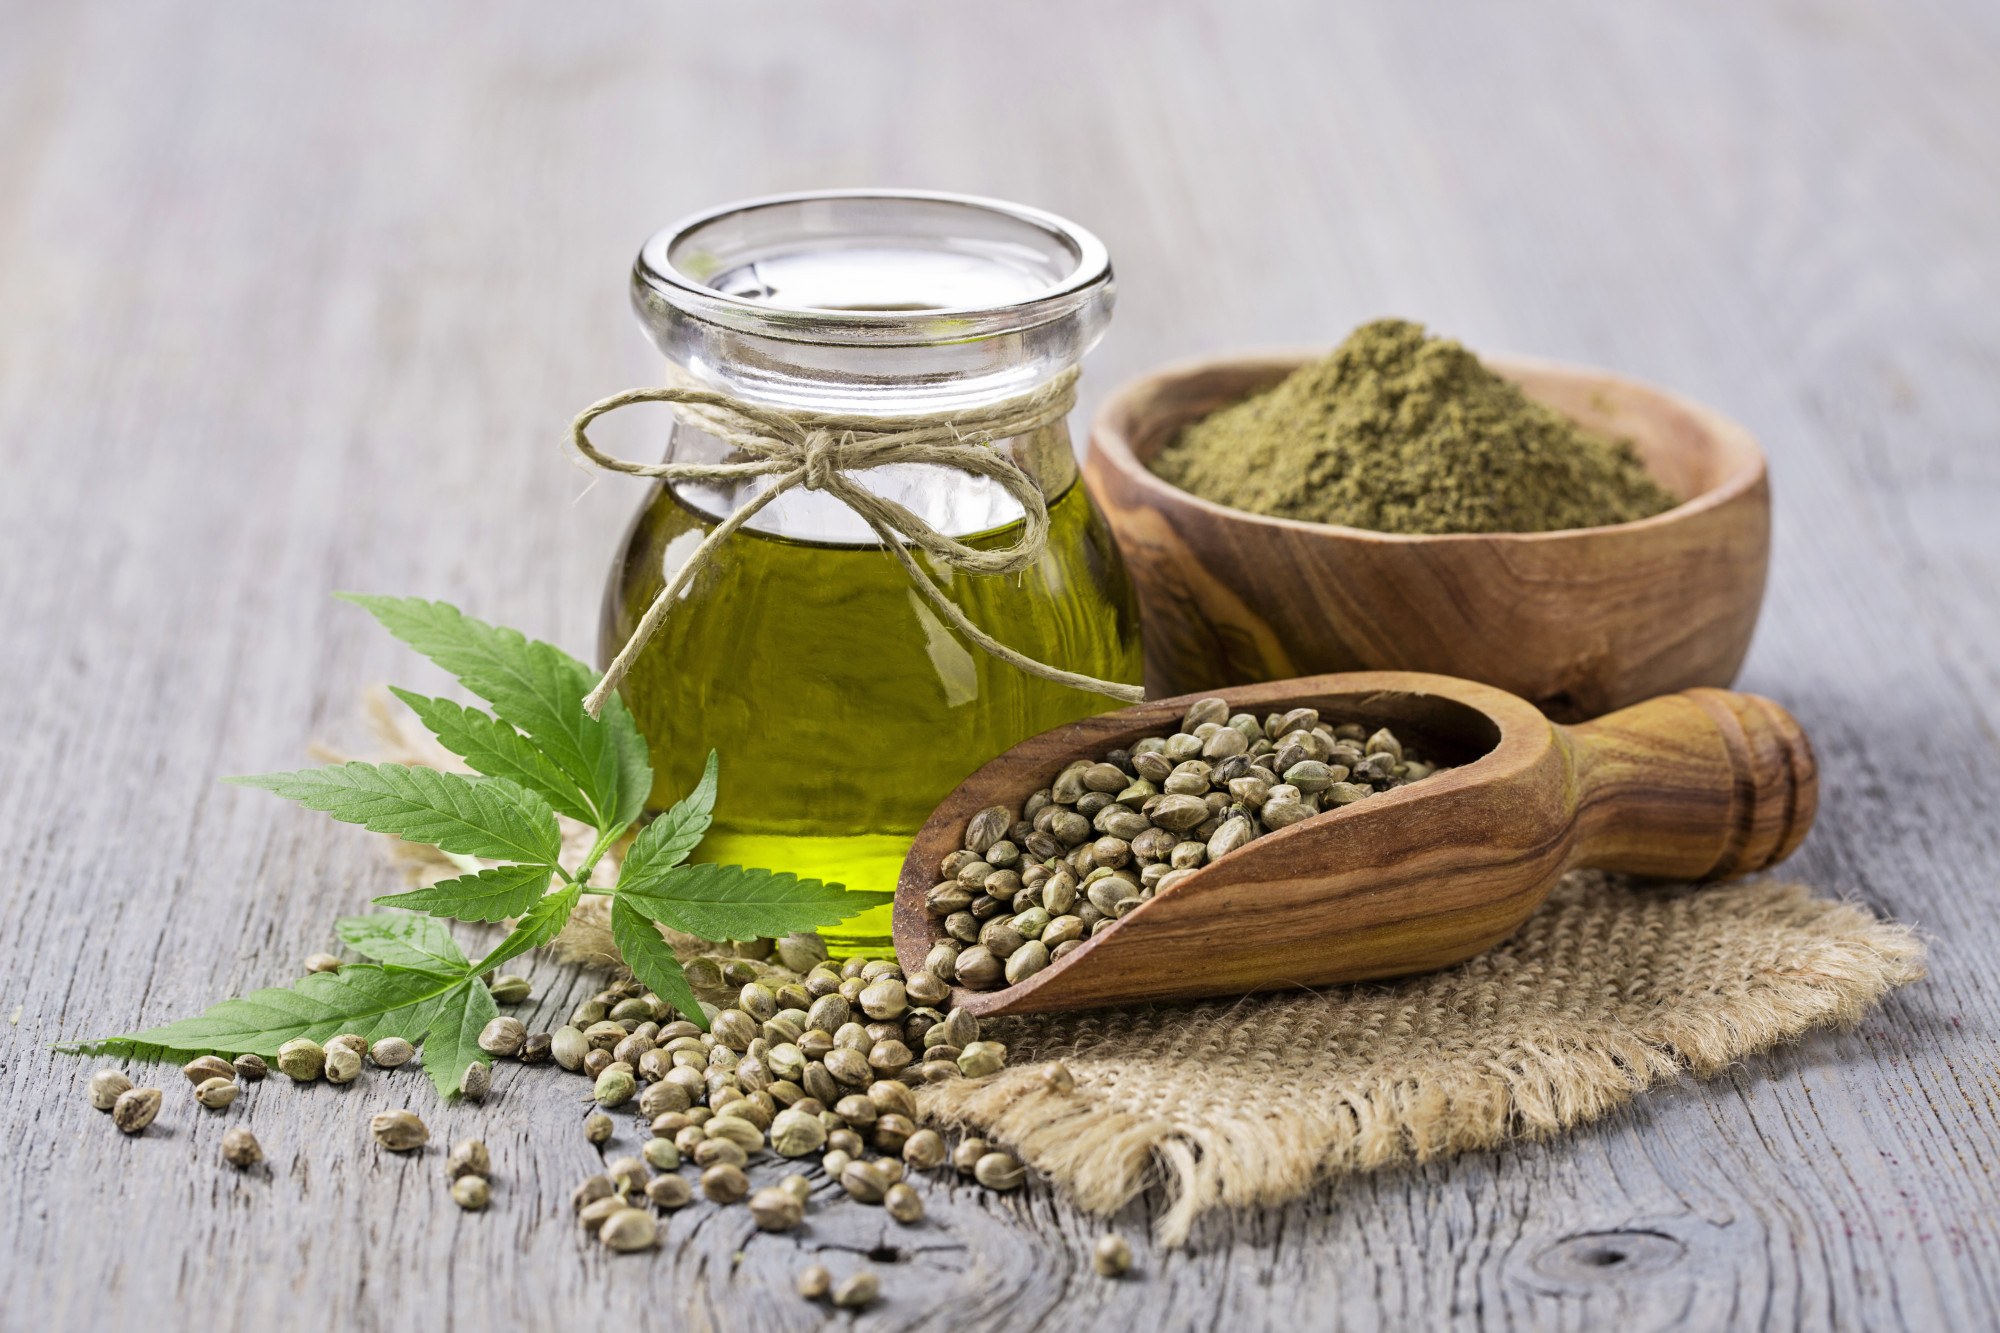 Hemp Oil Uses: The Complete Guide